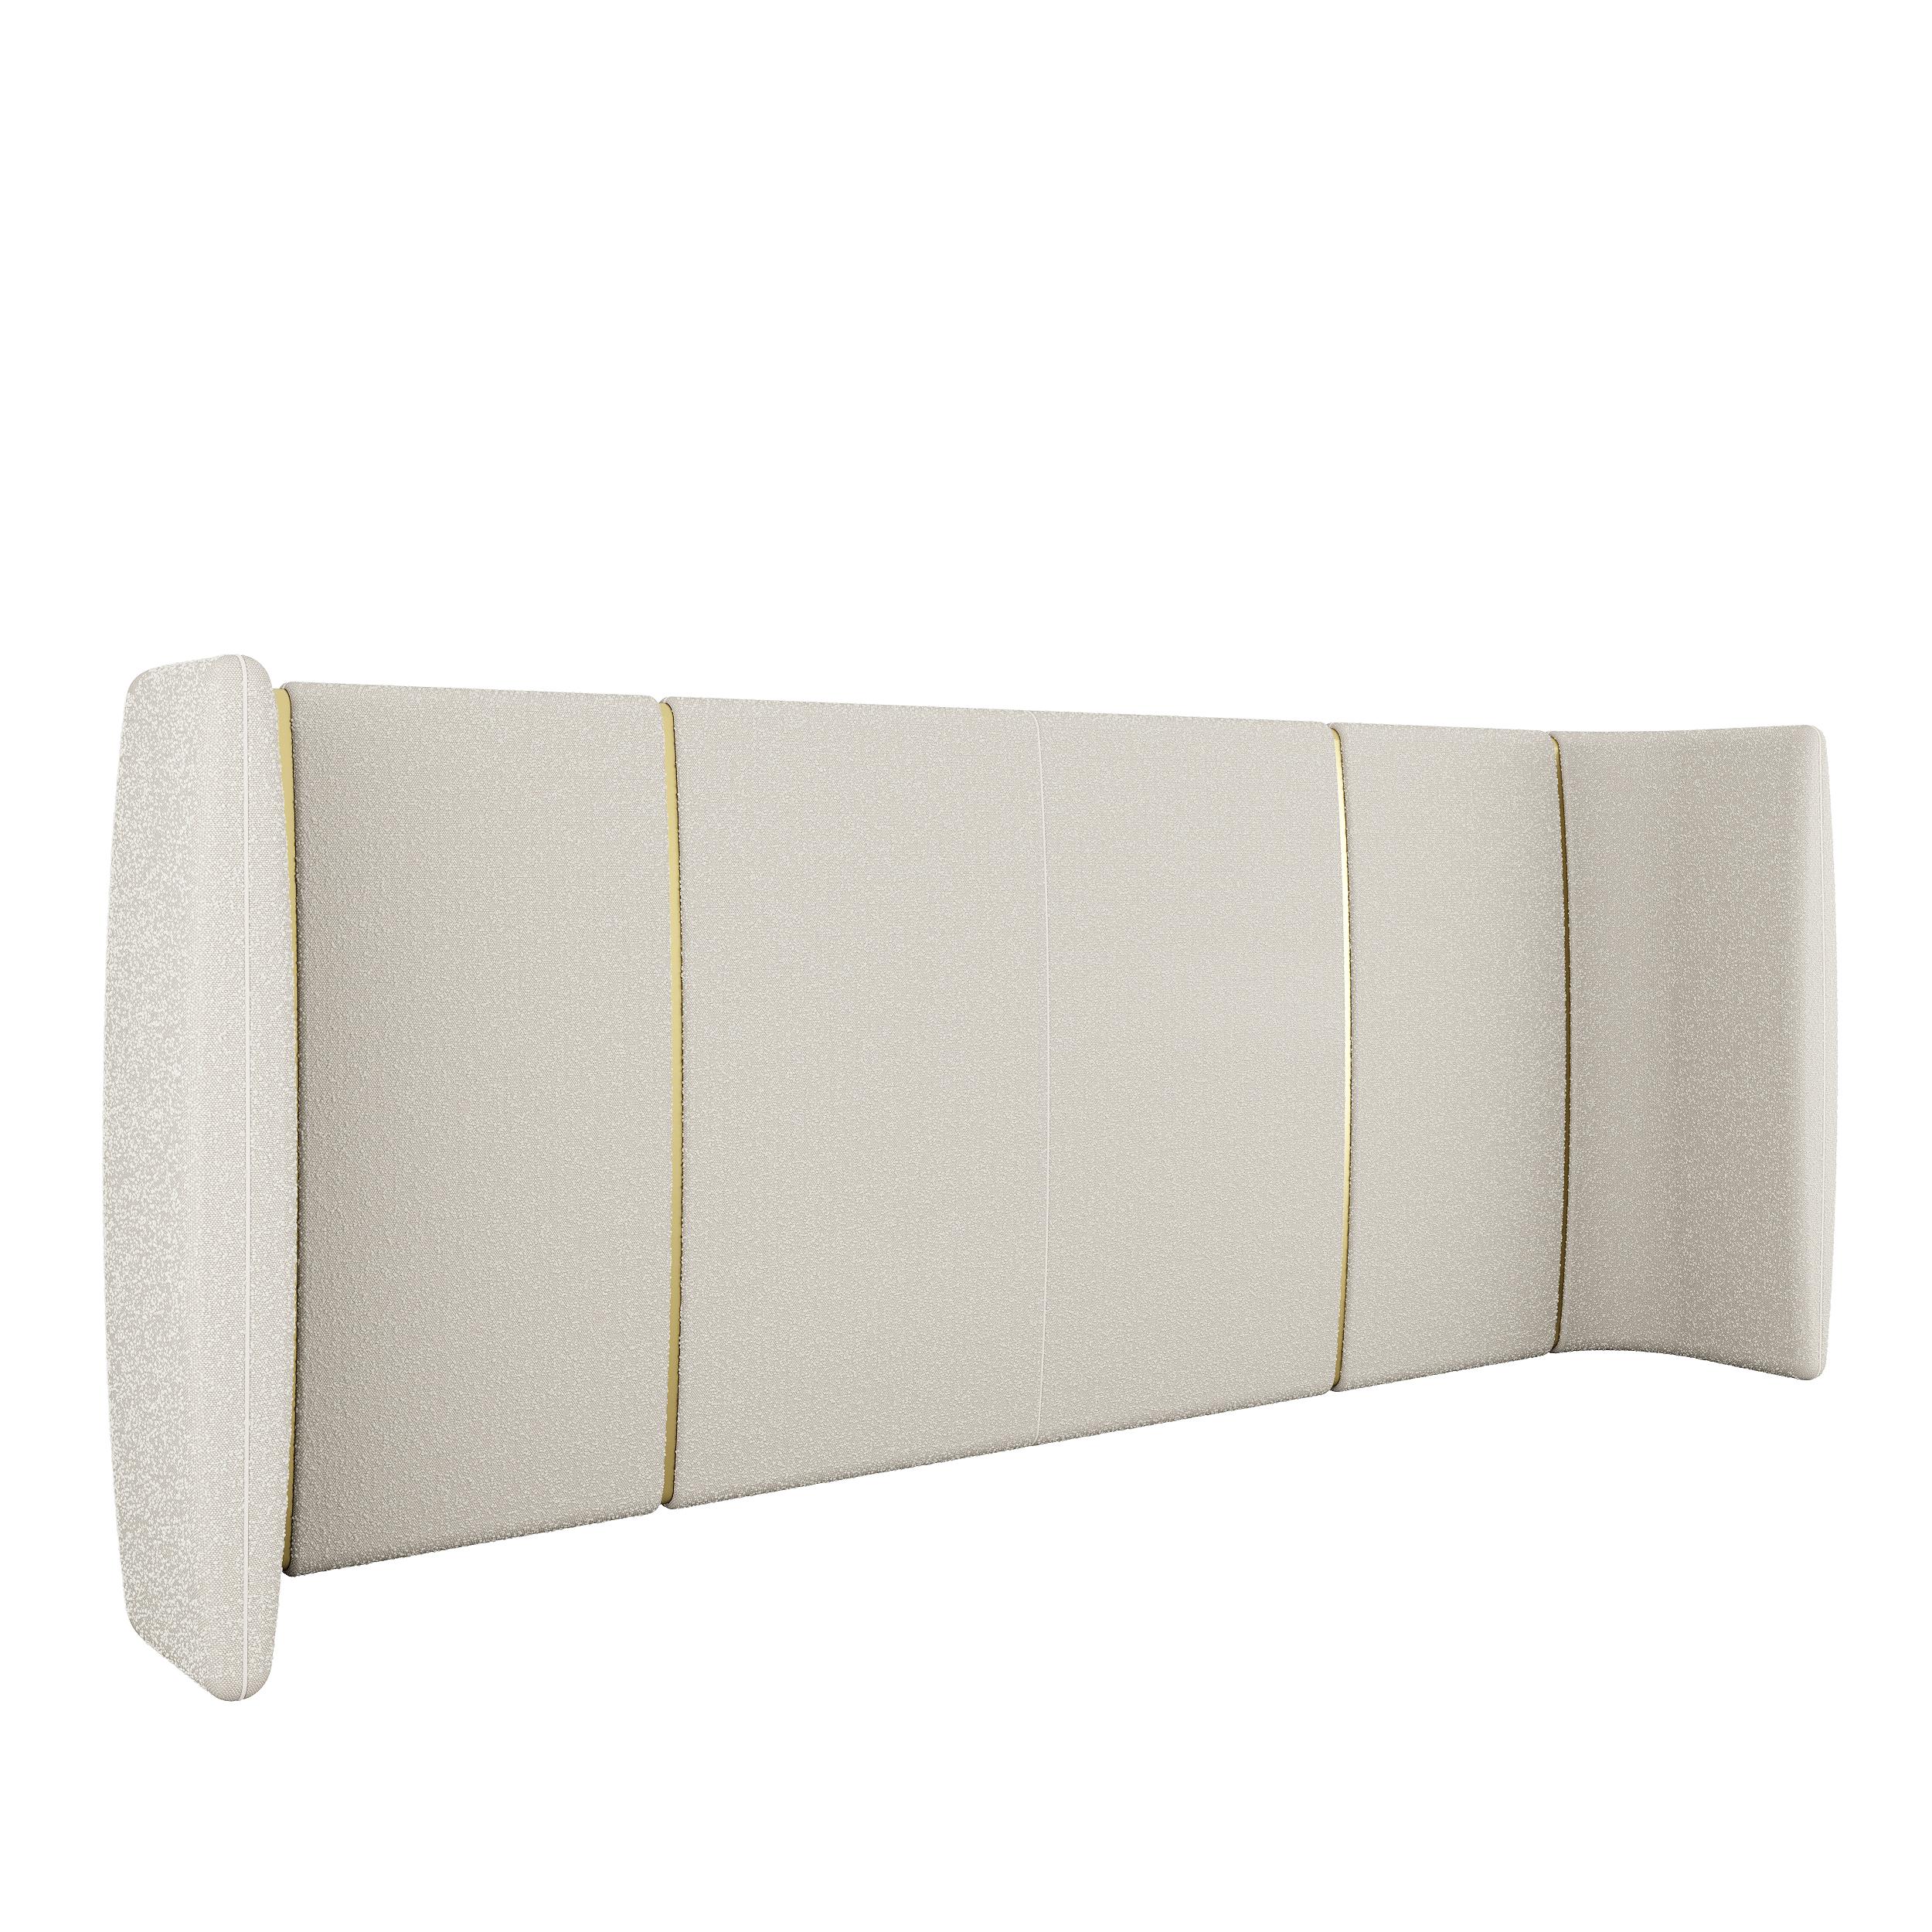 The Marriot headboard is available fully upholstered in a wide range of fabrics available from our collection. It is also possible to do it in COM (customers own material).
The inlaid details are lacquered in brass color, but is possible to do it